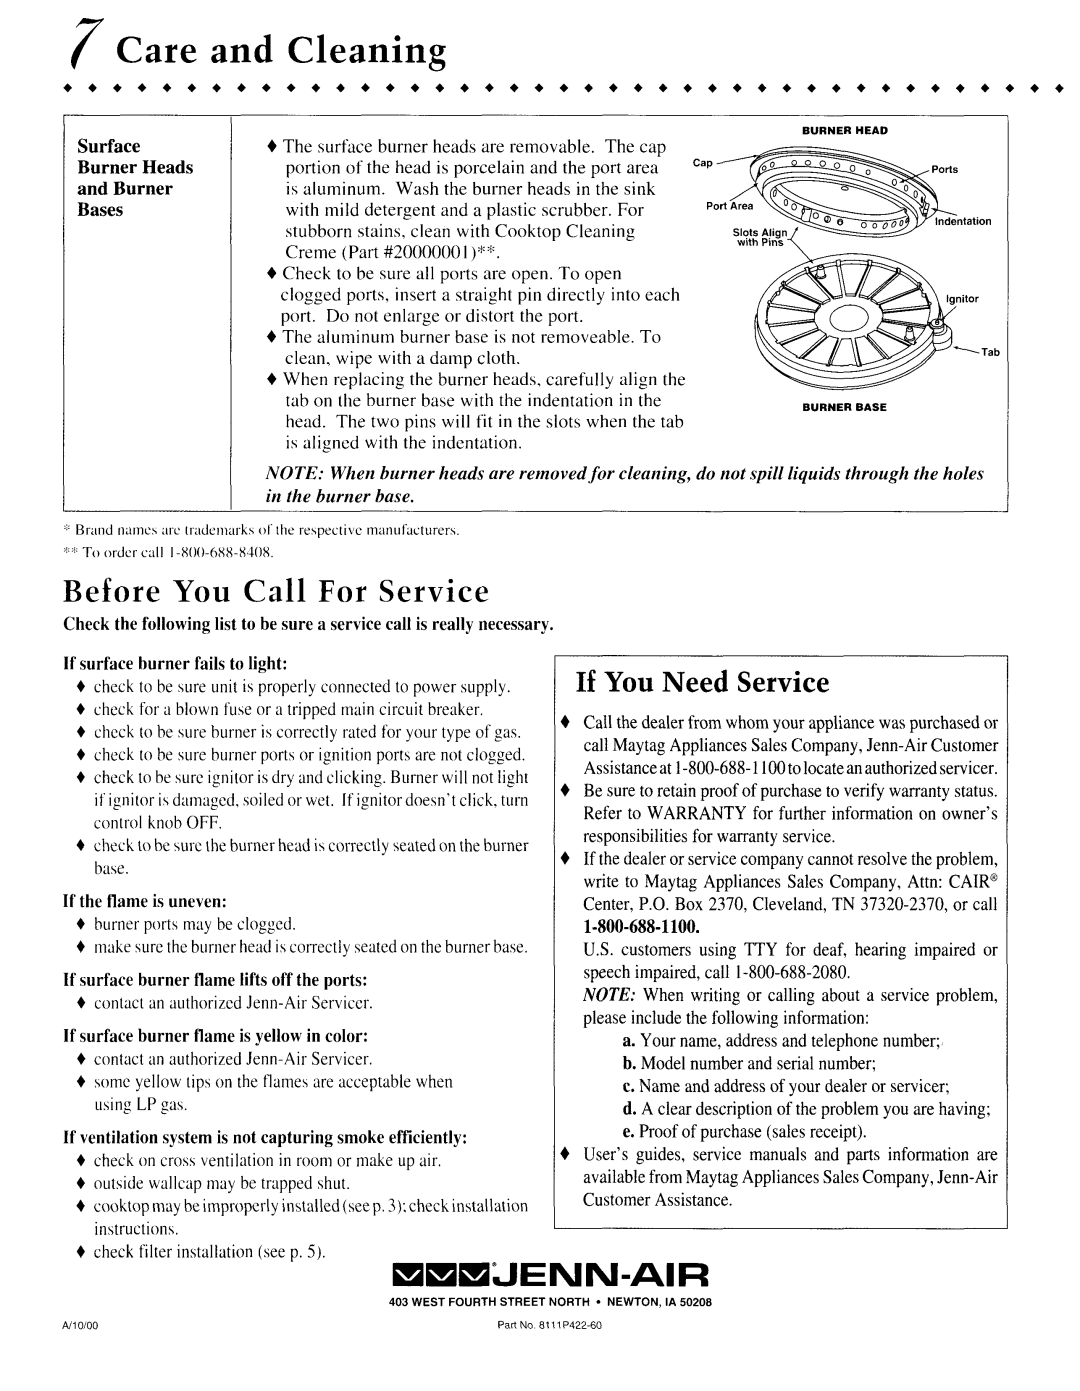 Jenn-Air CVGX2423 manual Care and Cleaning, Before You Call For Service, If You Need Service 